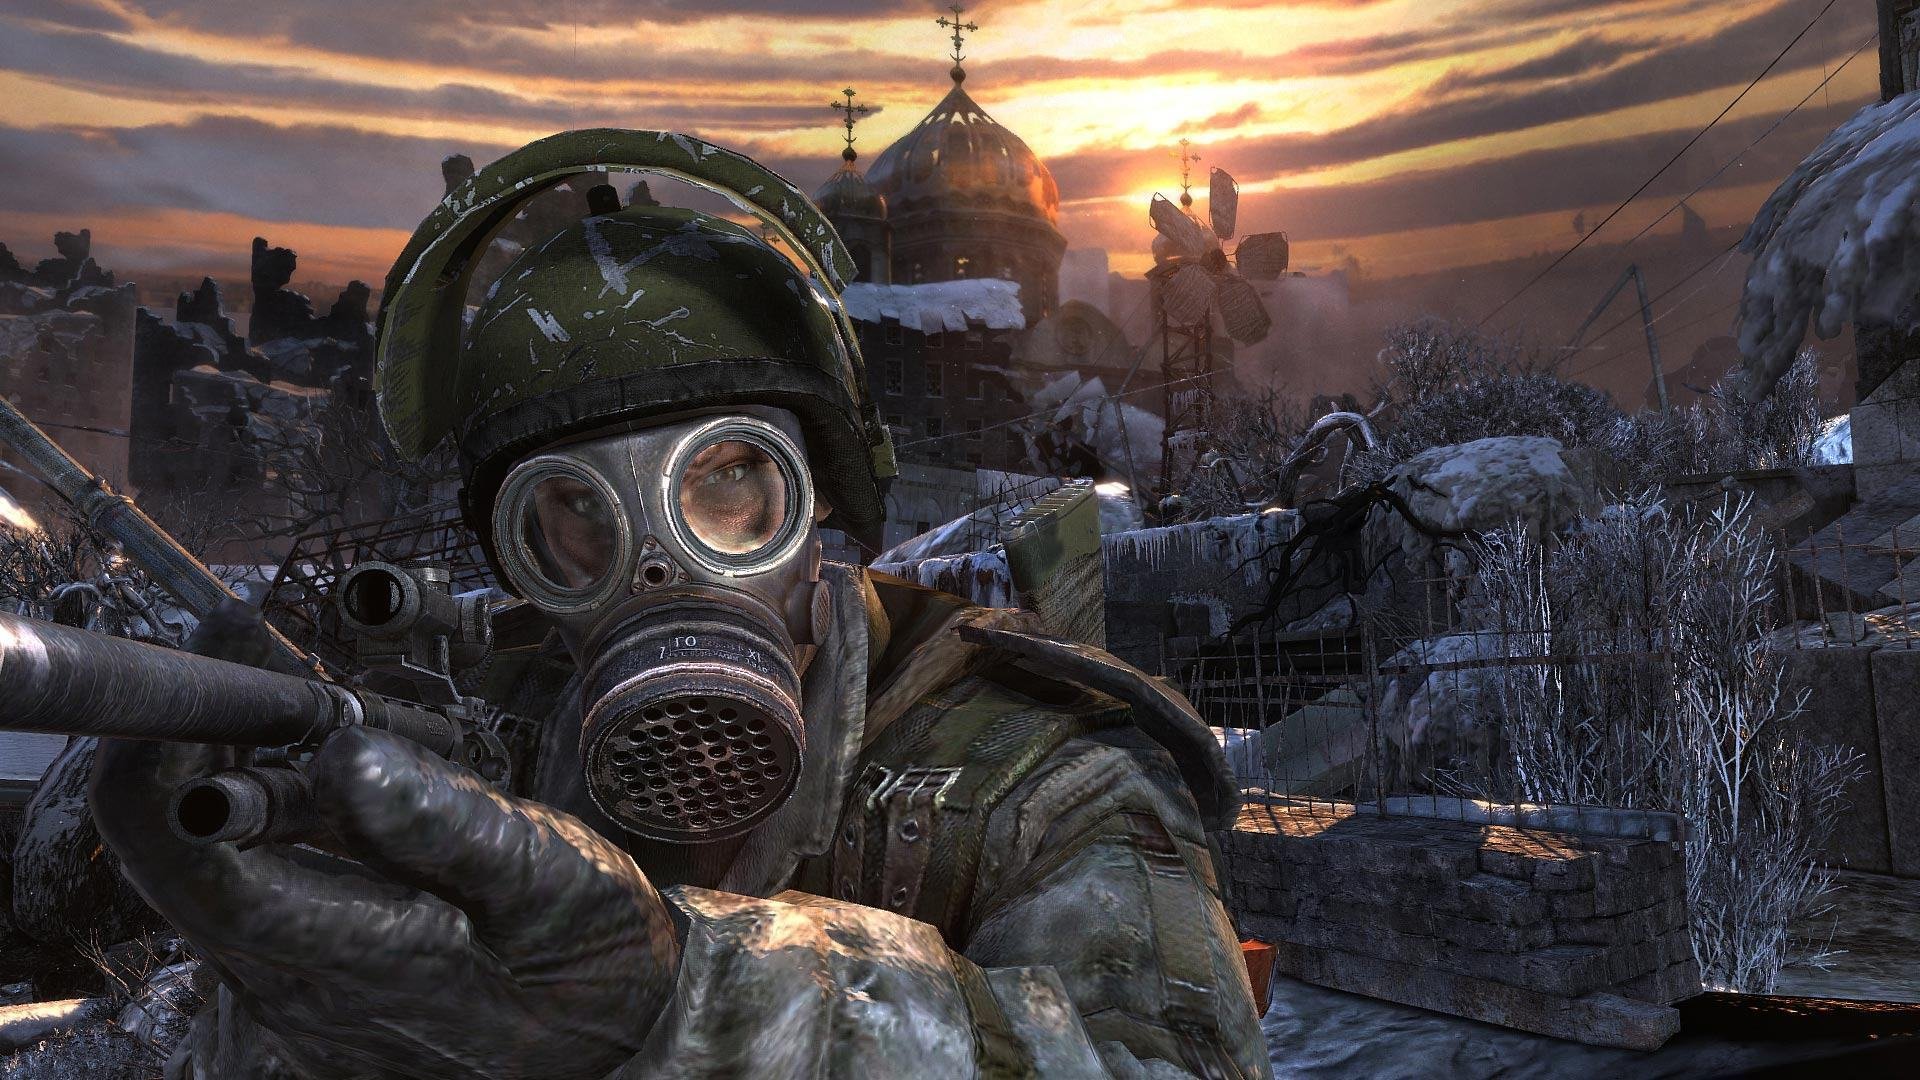 Metro 2033 Full HD Wallpaper and Background Image | 1920x1080 | ID:177971